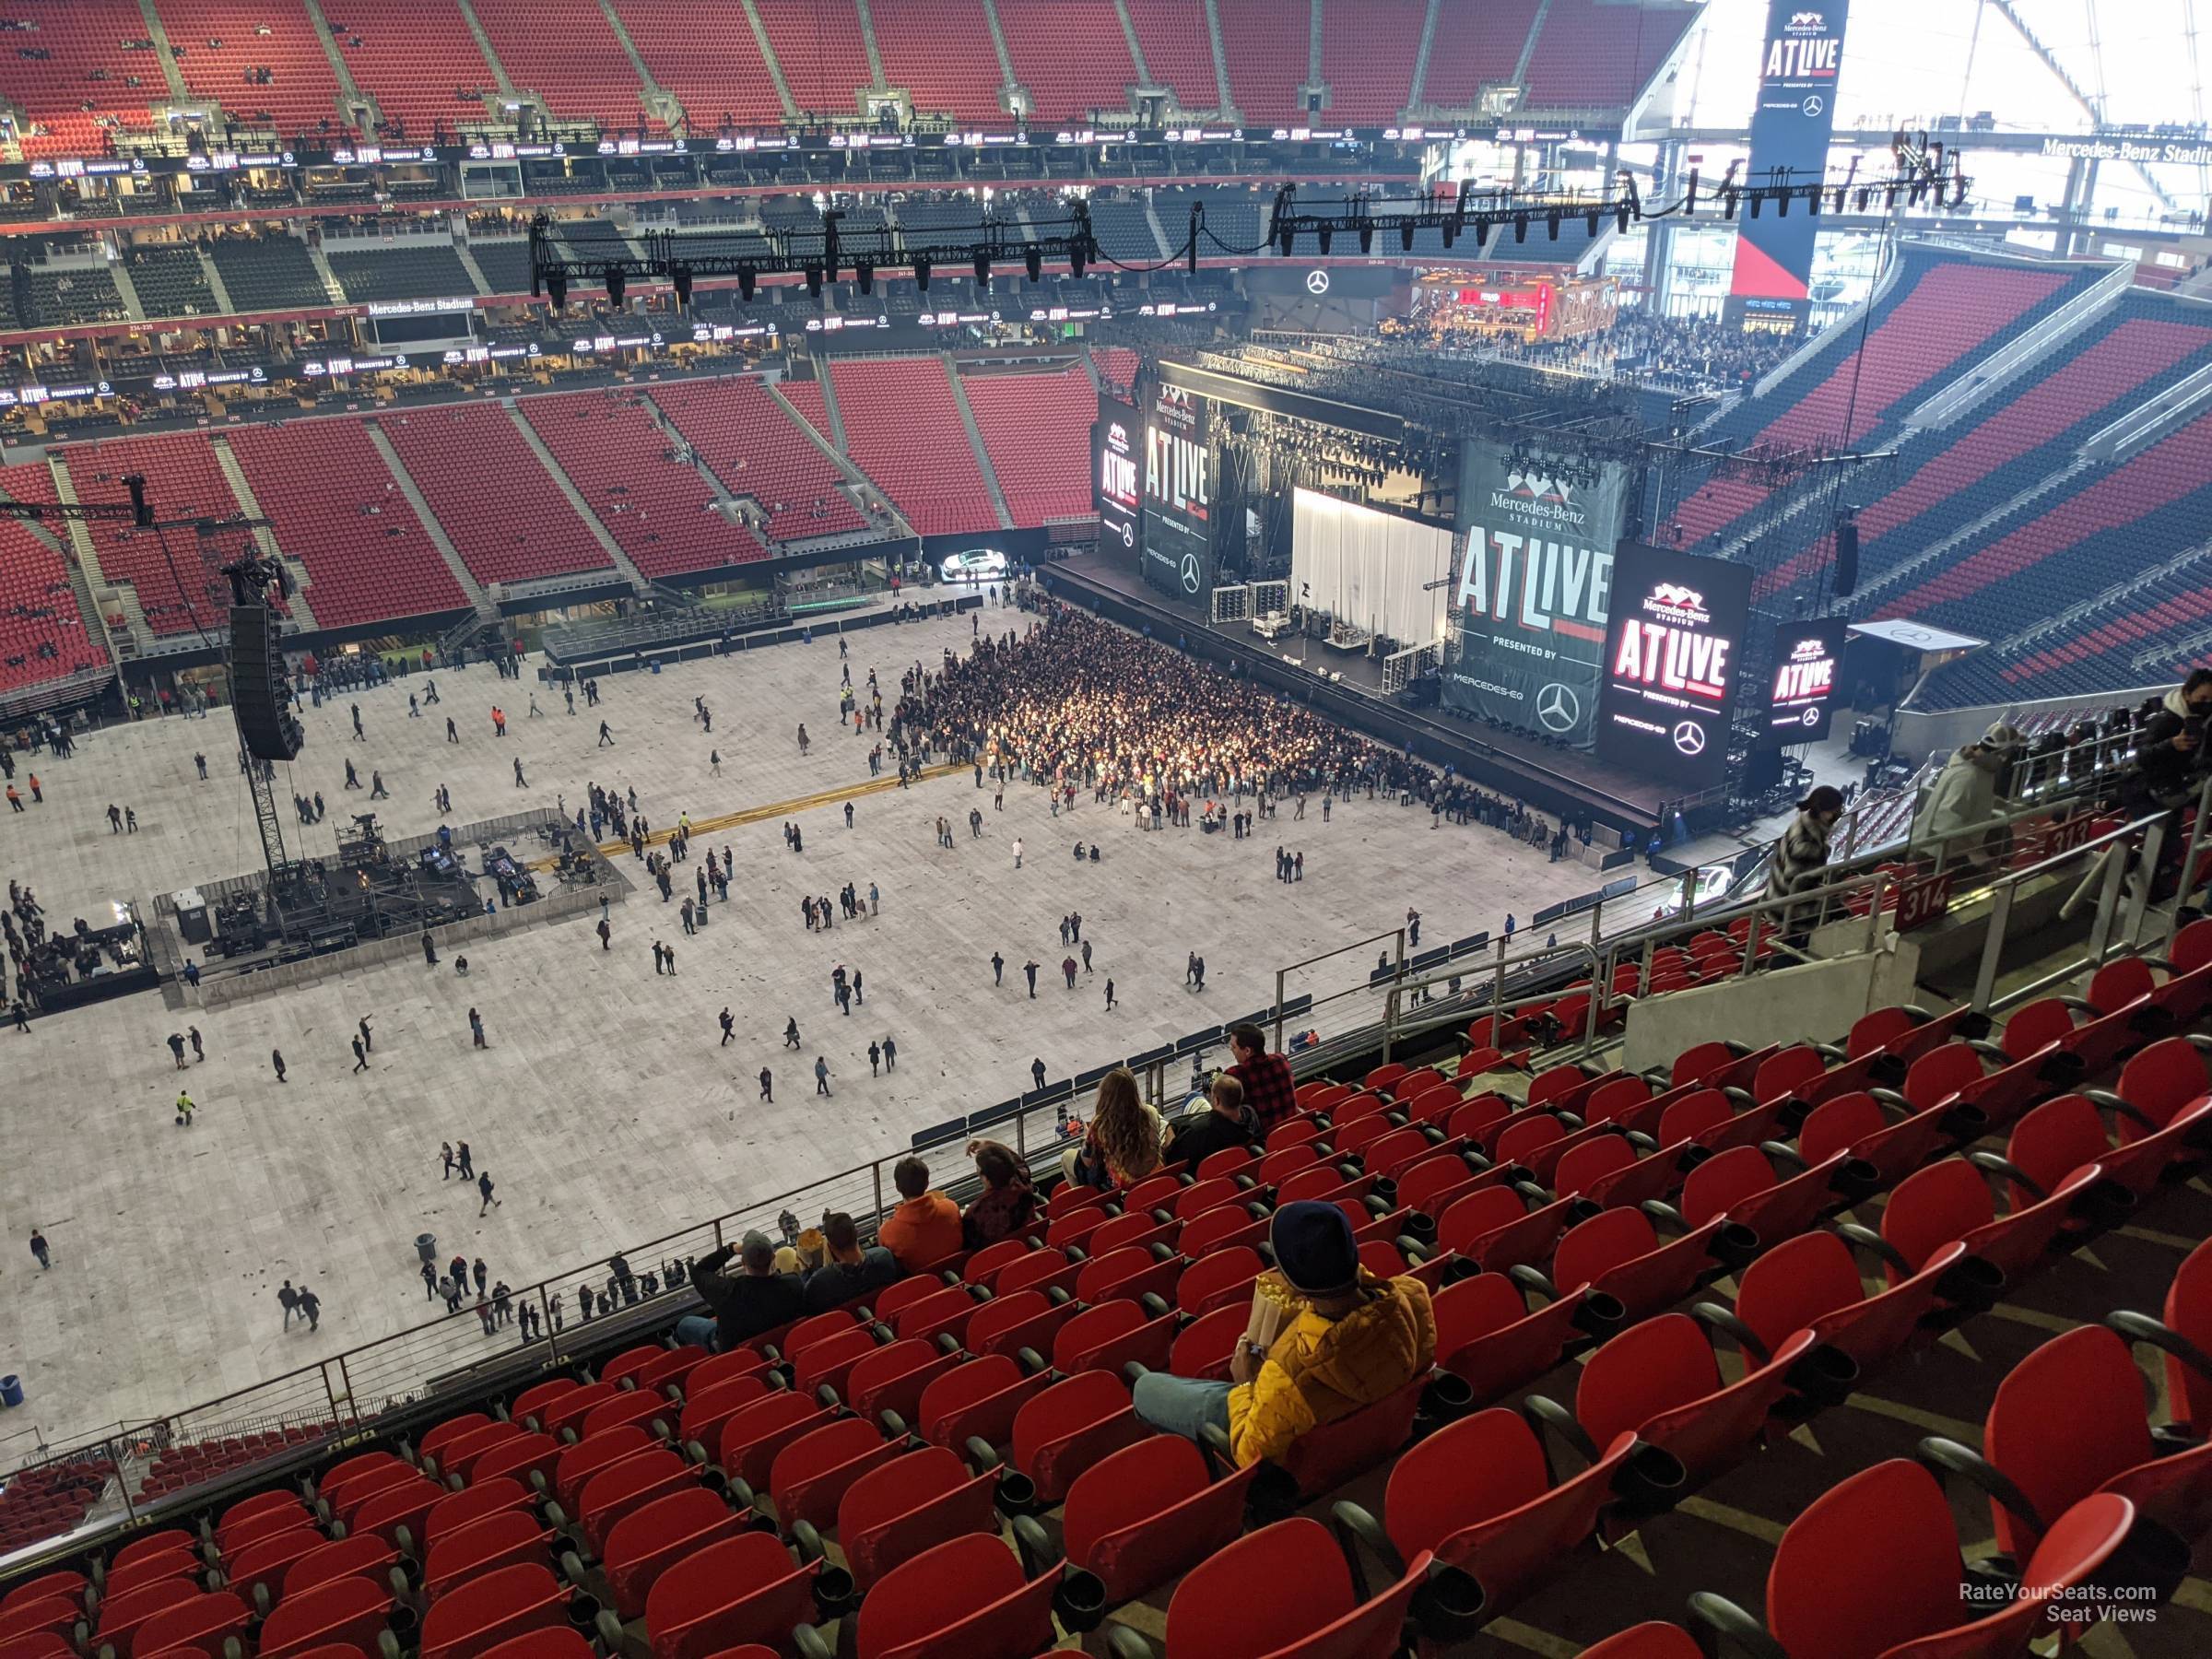 section 314, row 13 seat view  for concert - mercedes-benz stadium